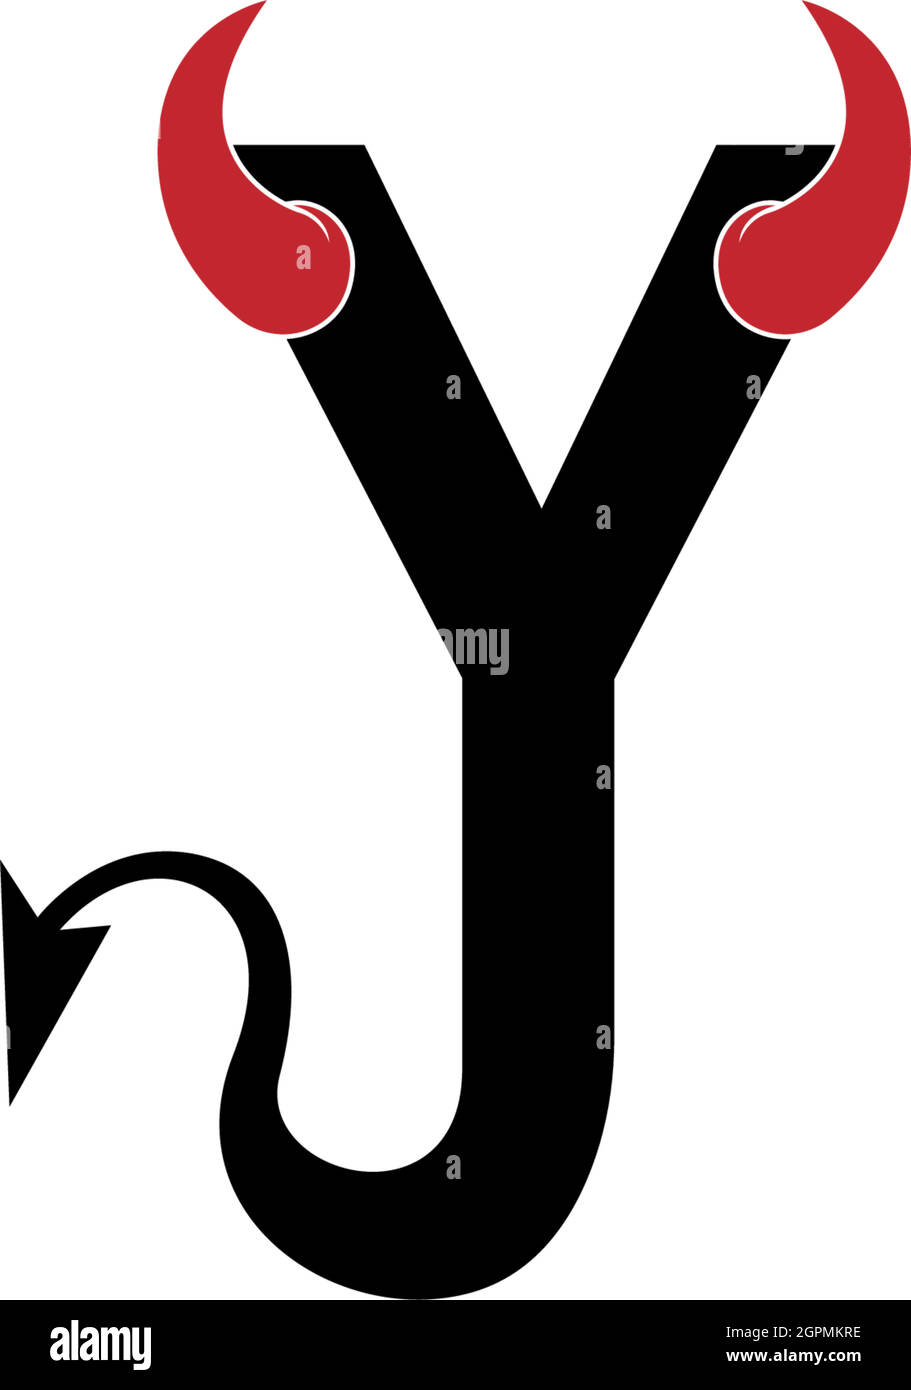 Letter Y with devil's horns and tail icon logo design vector Stock Vector